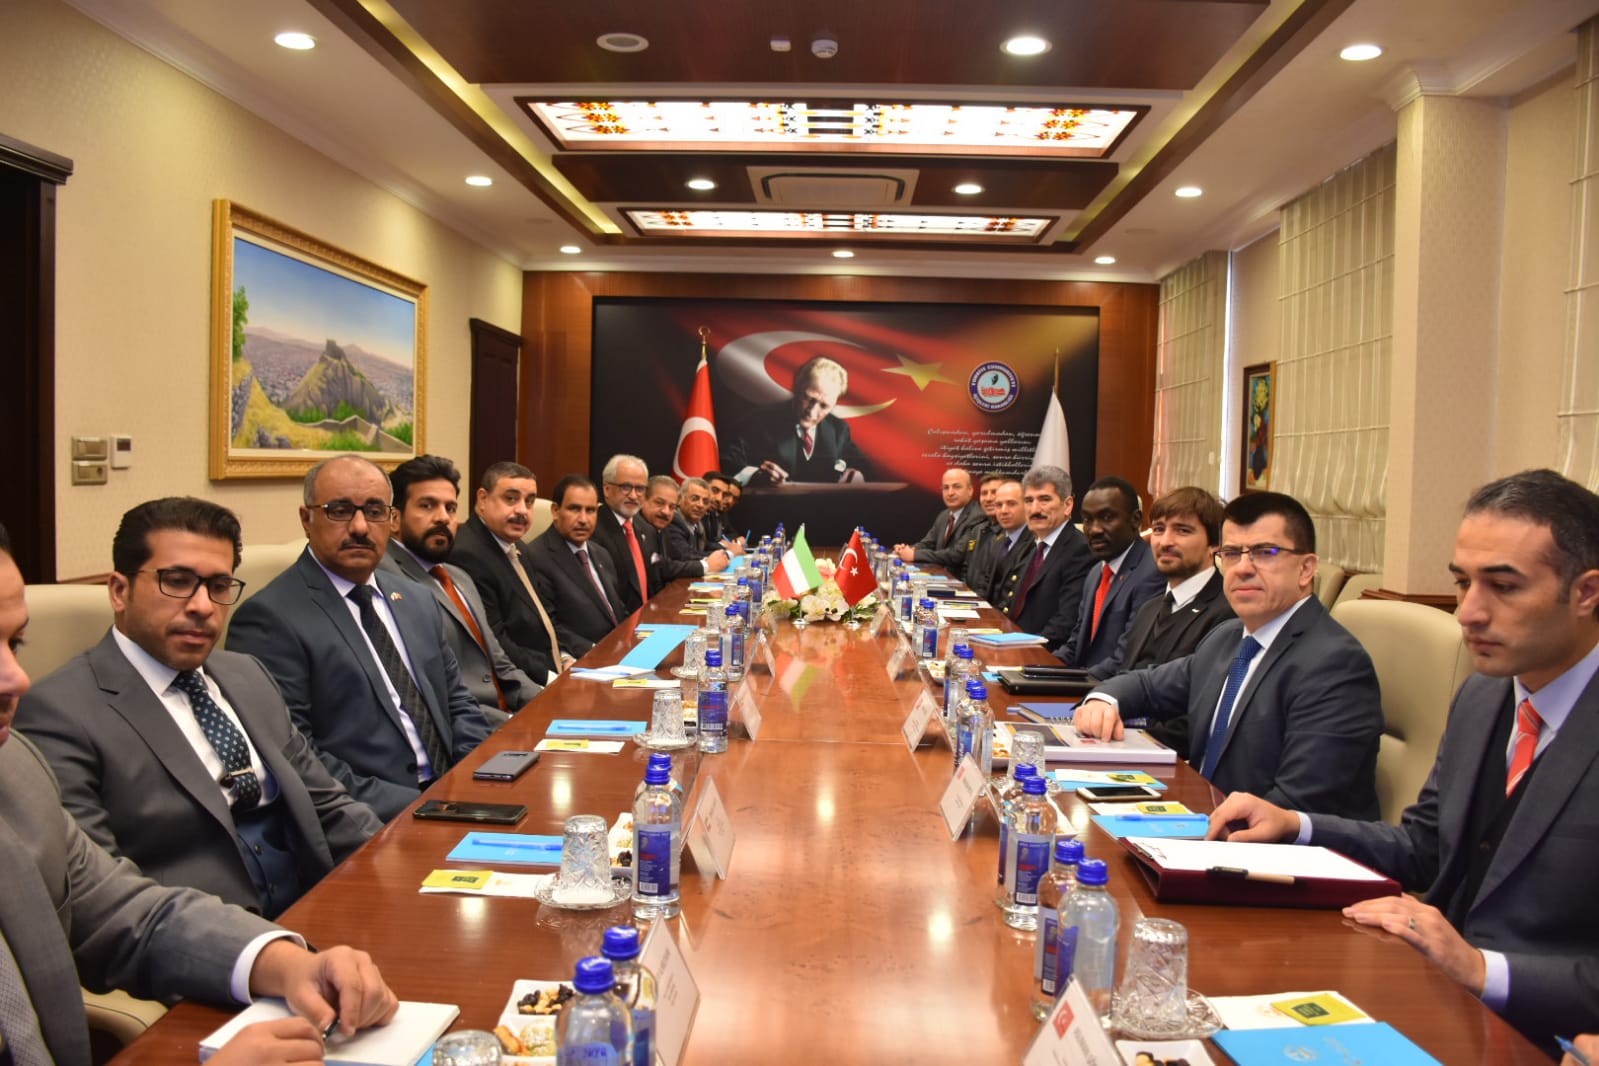 Kuwaiti security delegation during the meeting